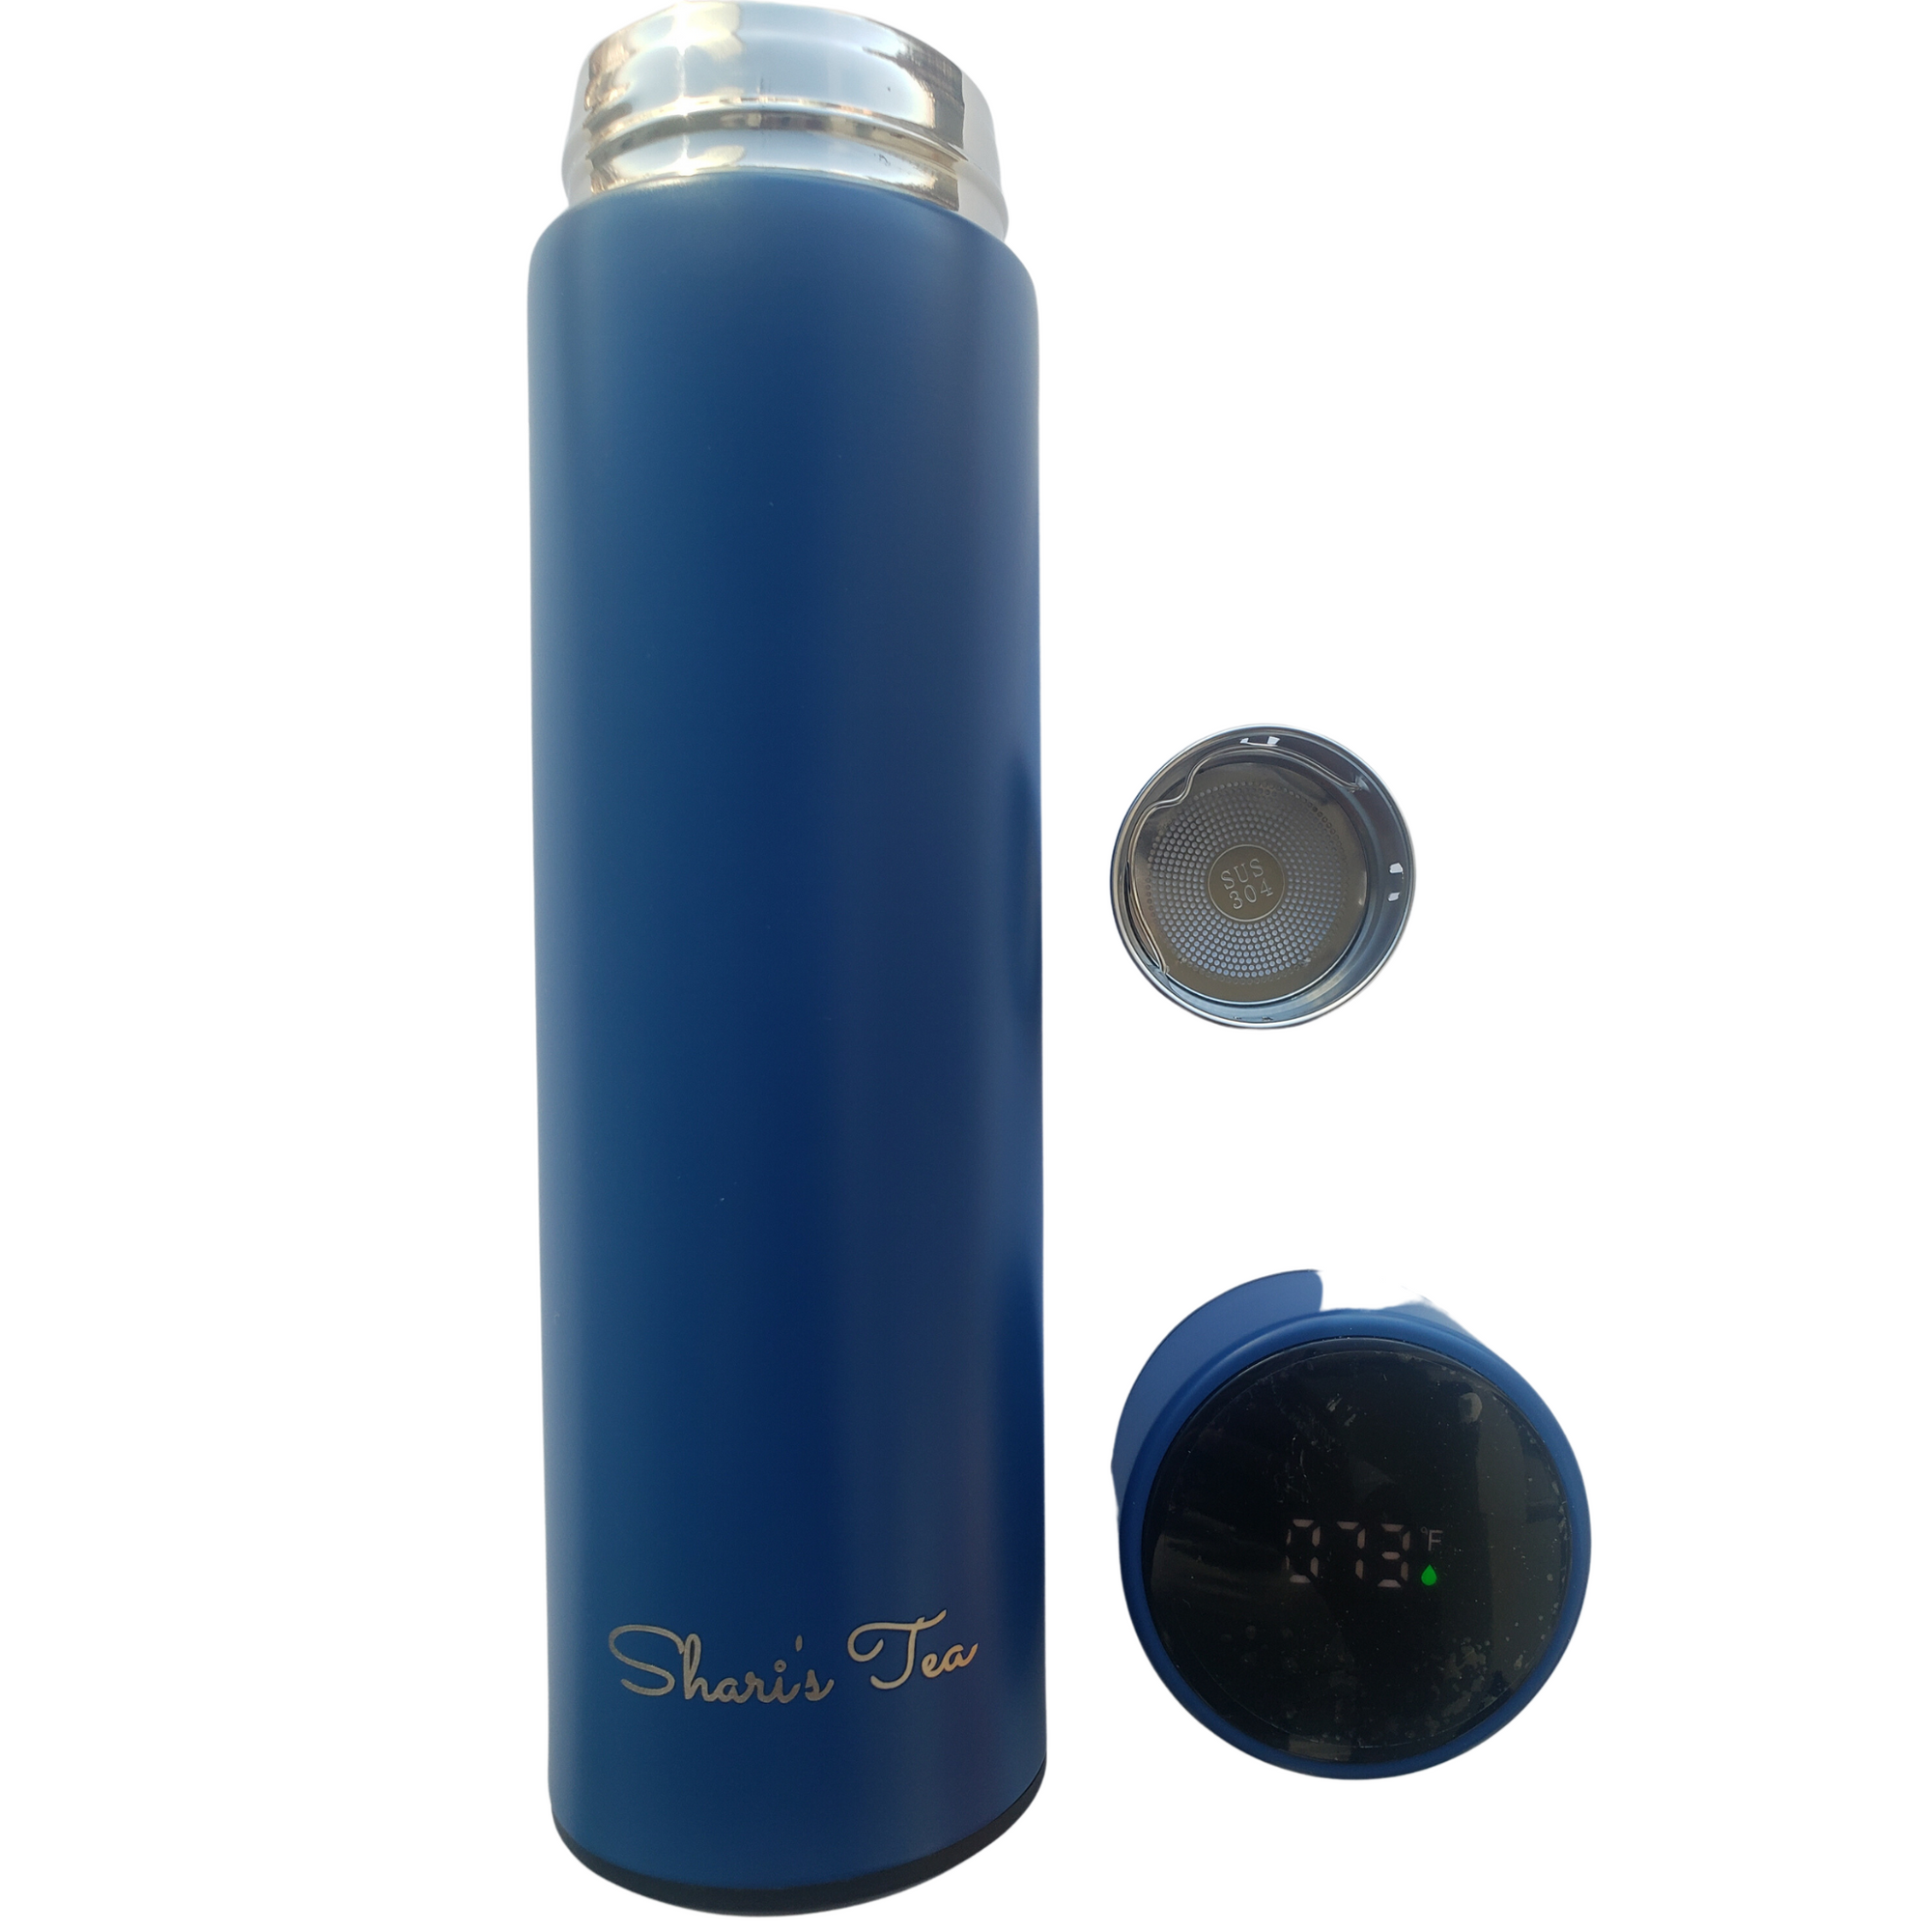 Tea Thermos with Digital Temperature Gauge and Infuser - Blue